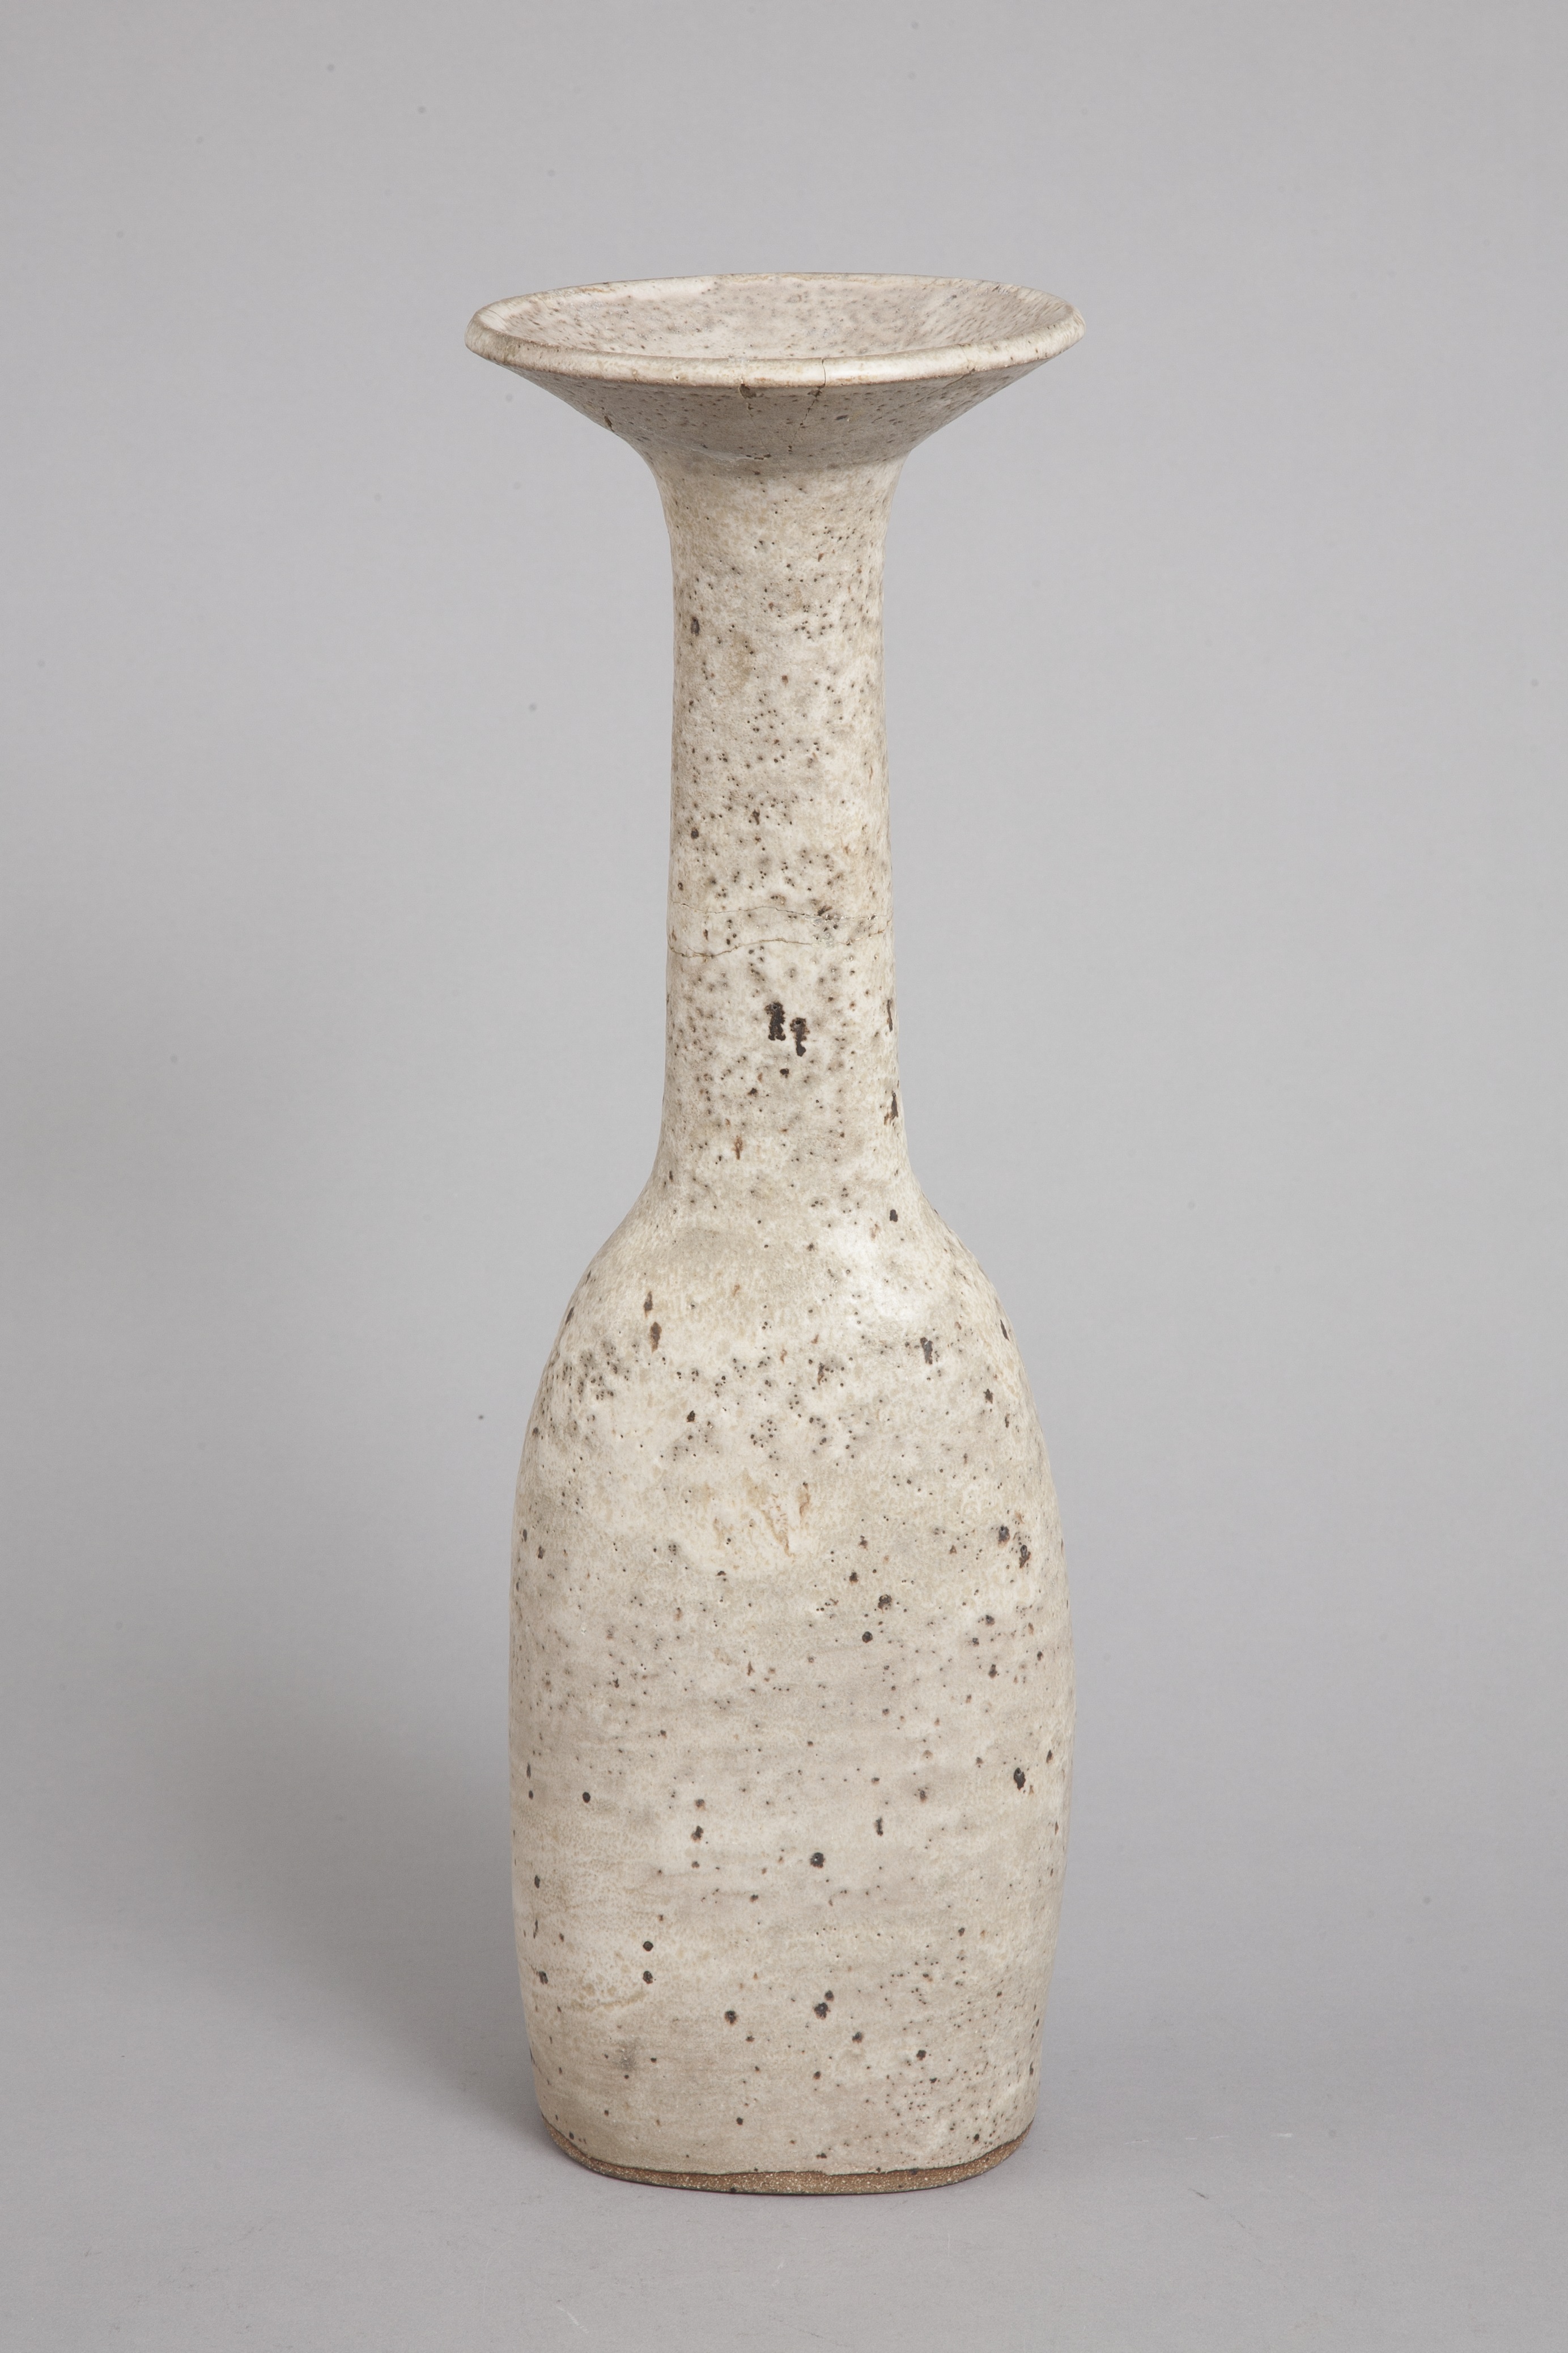 A piece of pottery by Lucie Rie